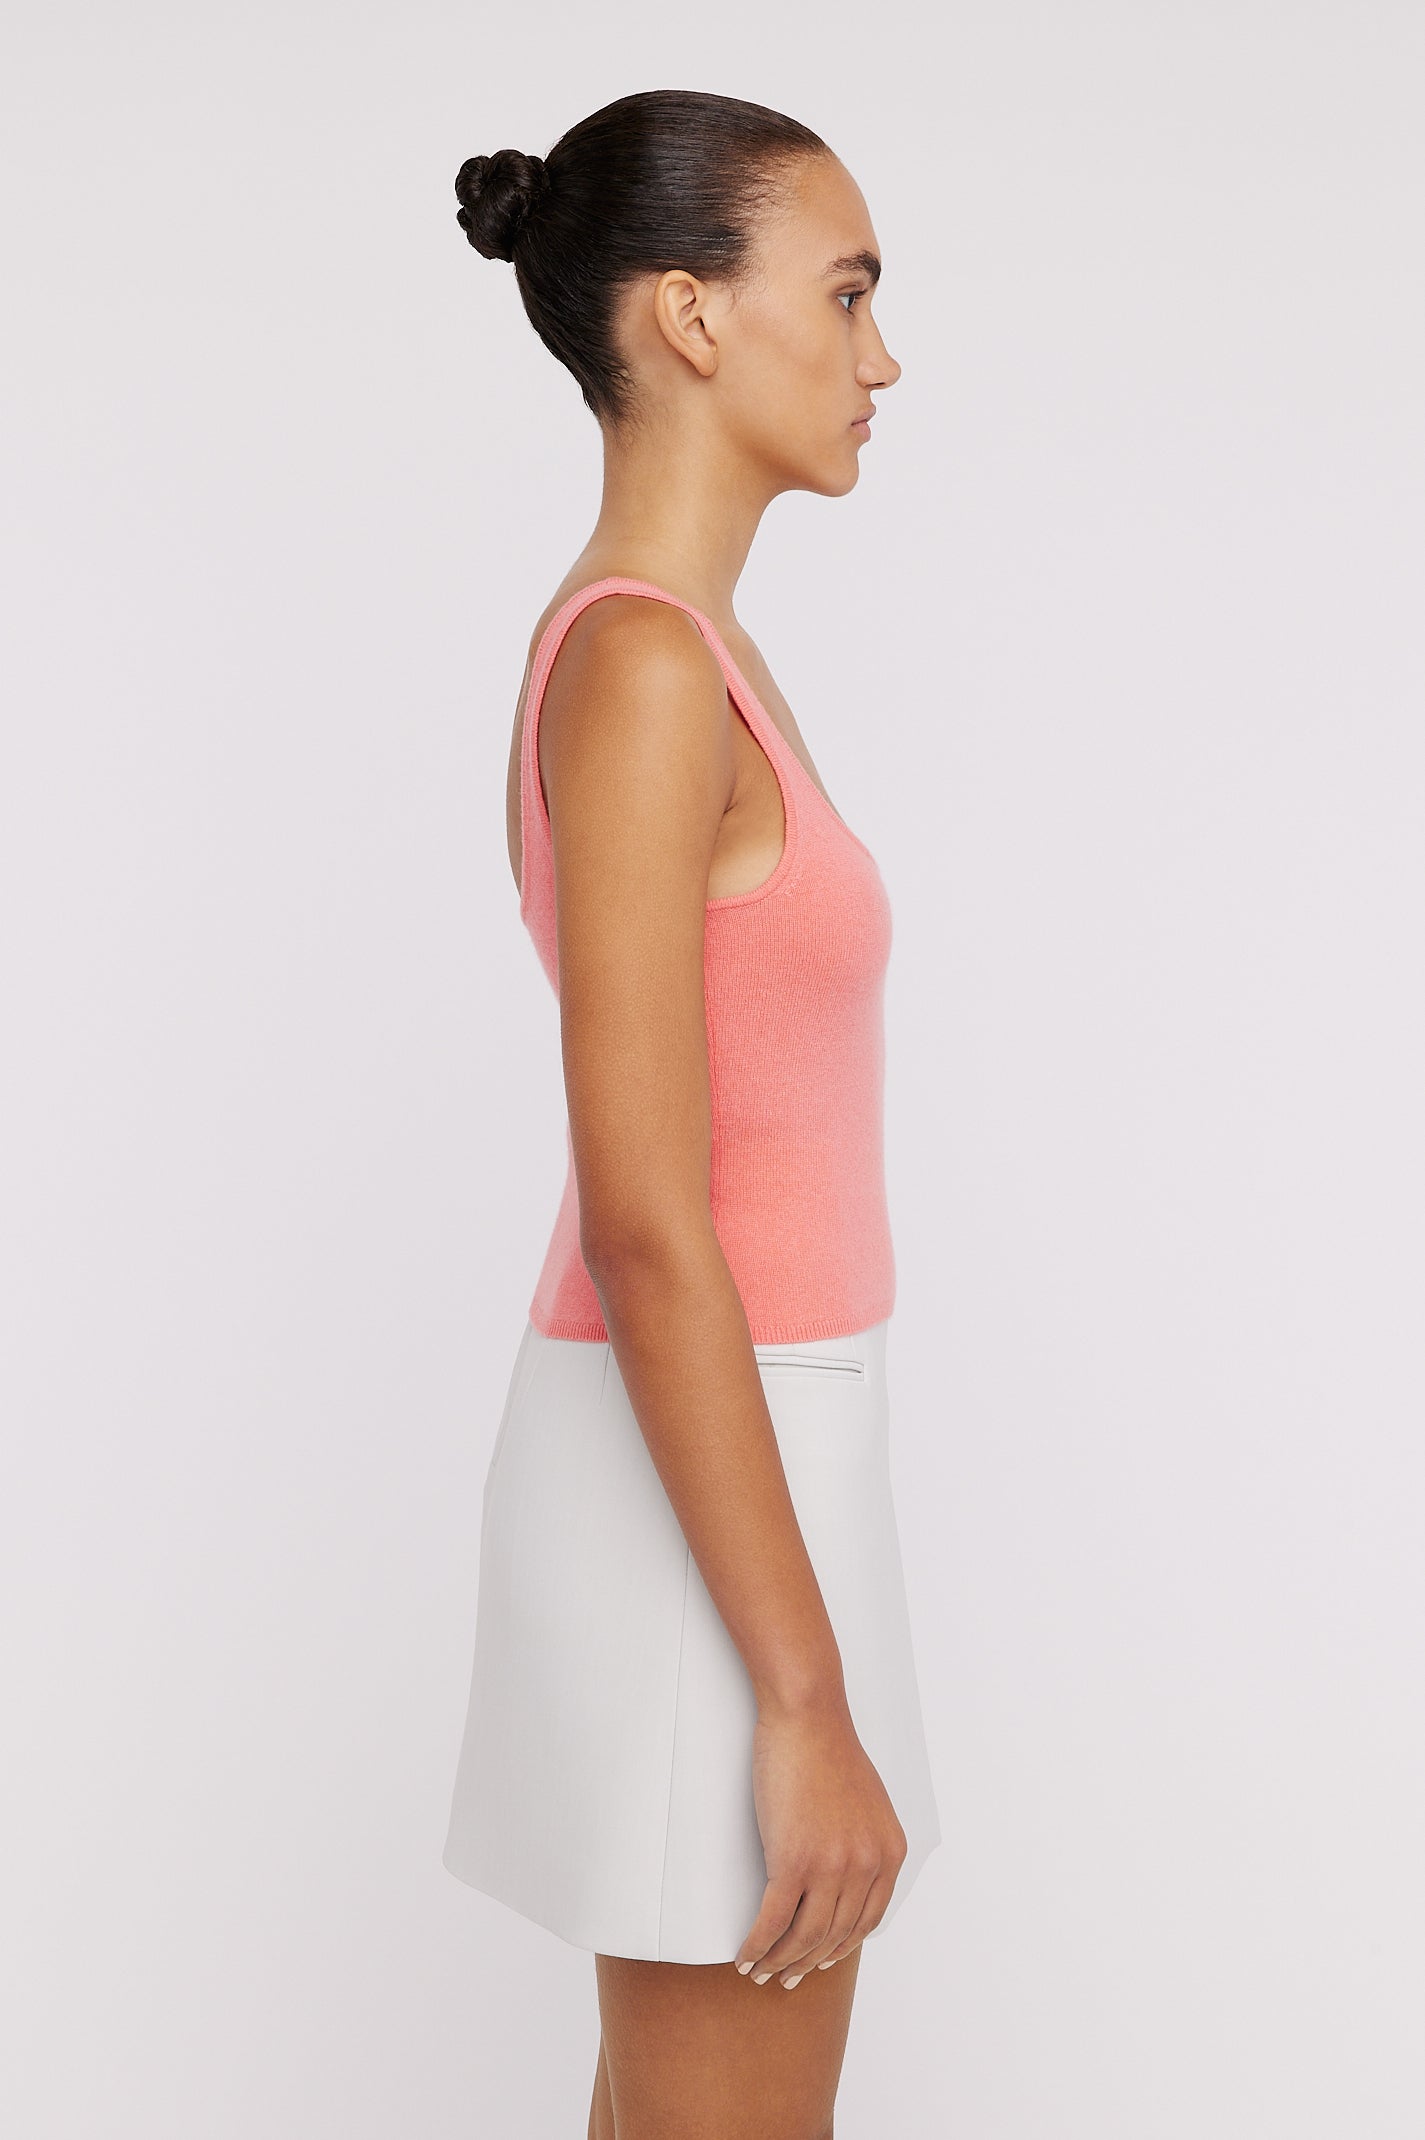 Cashmere Singlet 12 Coral CORAL - Scanlan Theodore US